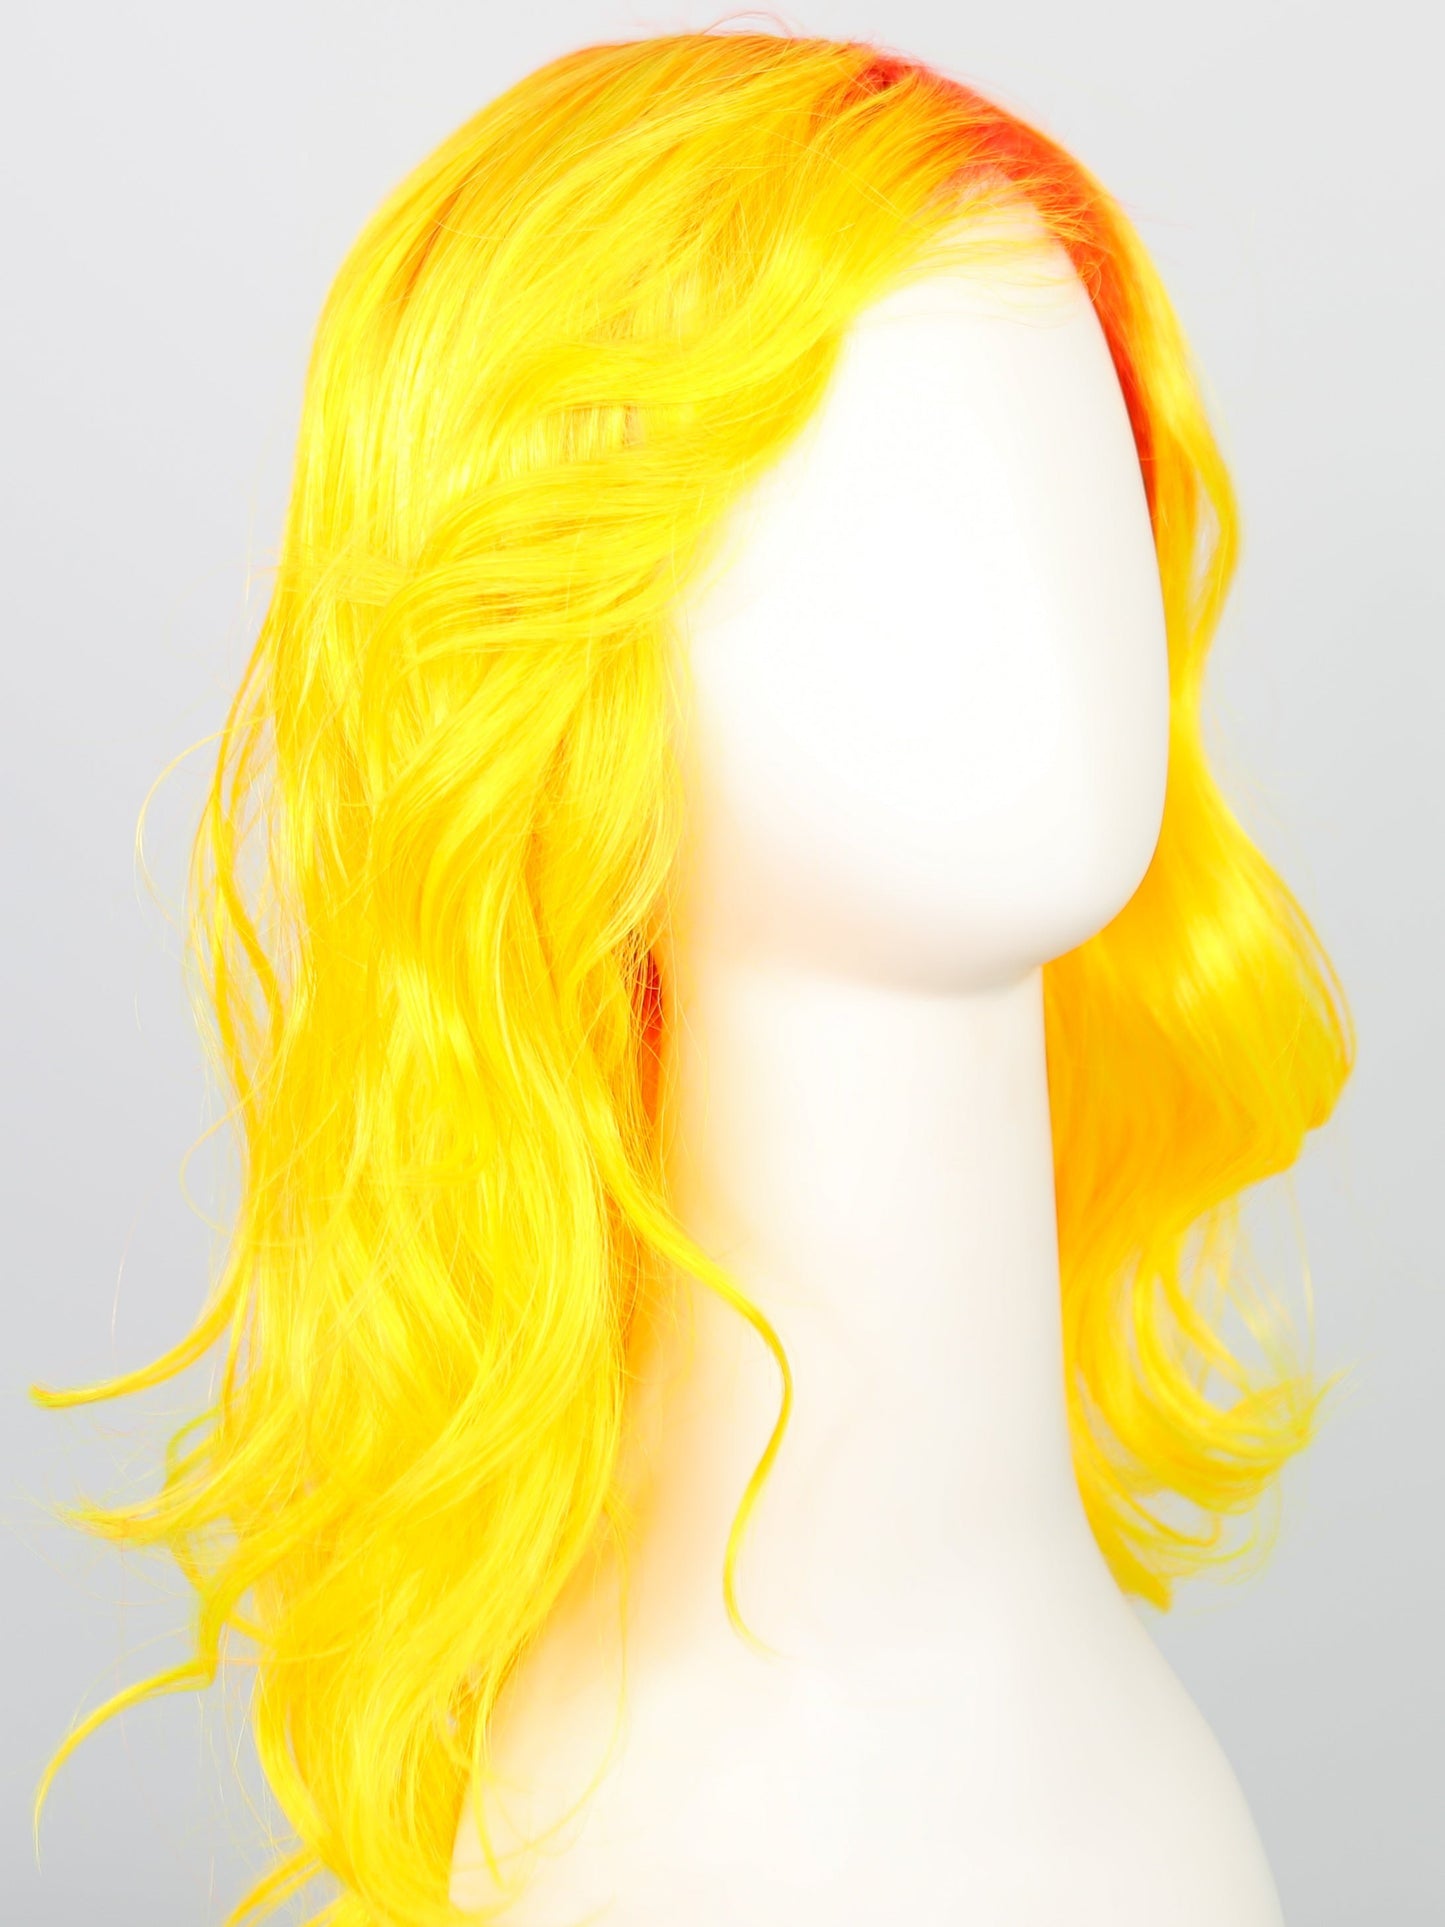 MANGO SUNRISE | Orange Root with long brilliant gold color throughout.